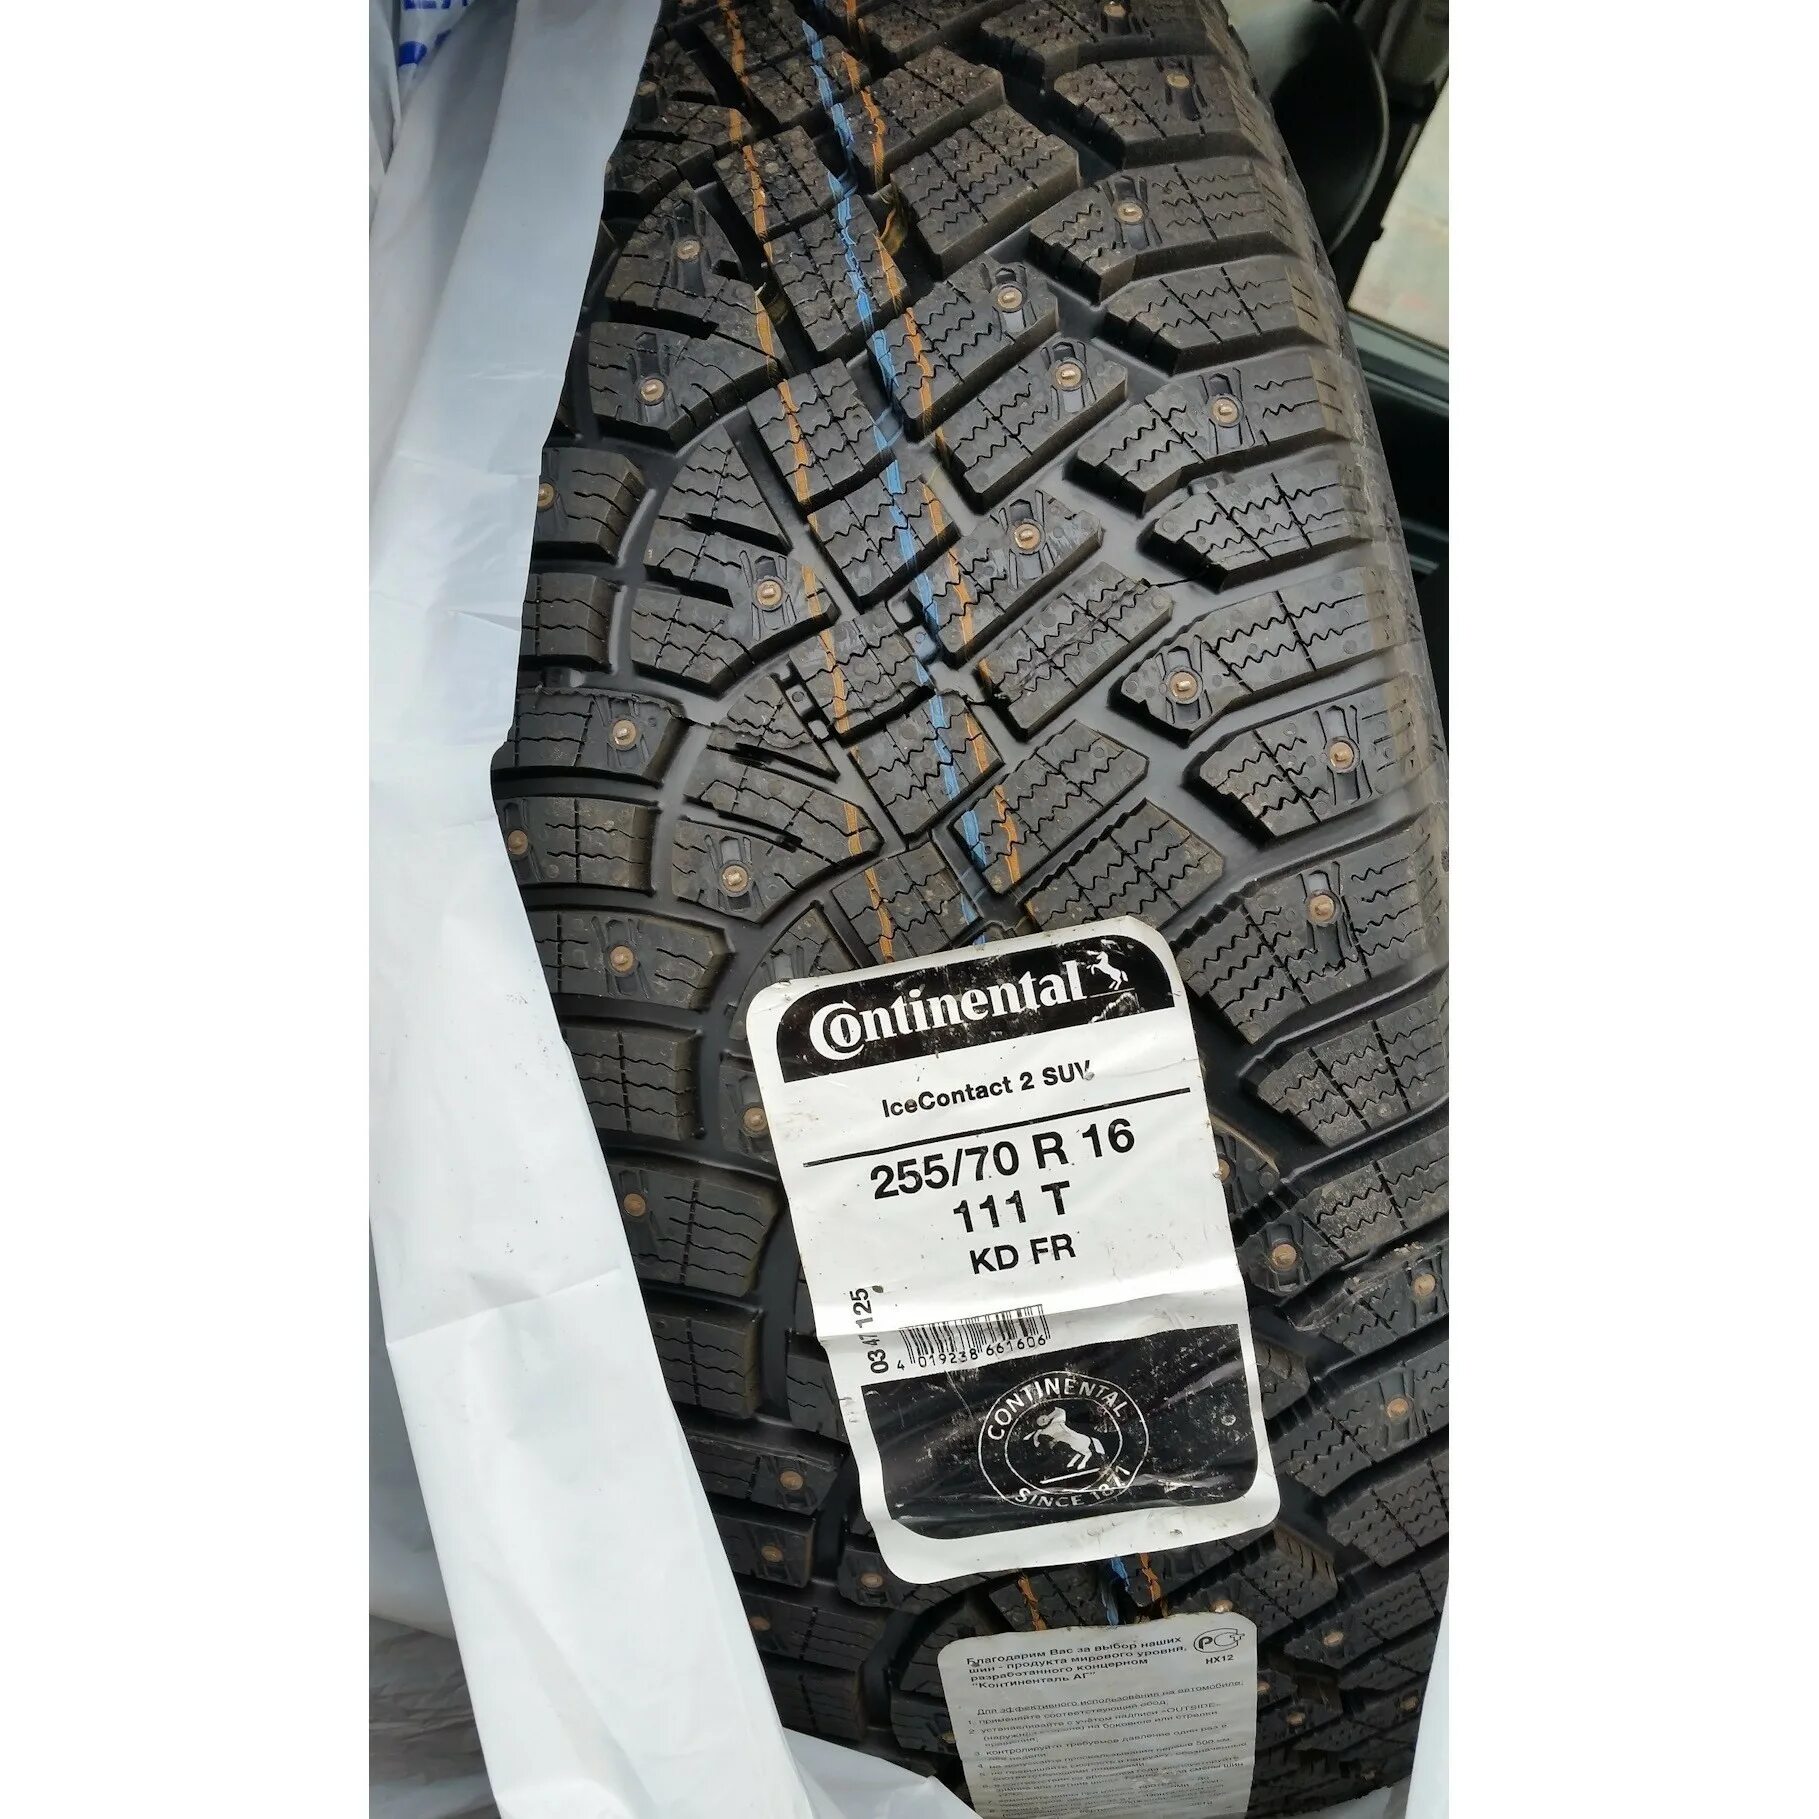 Continental ICECONTACT 2 SUV. Continental ICECONTACT 2 KD. 235/55r18 Continental ICECONTACT 2. Континенталь Ice contact 2. Континенталь айс 2